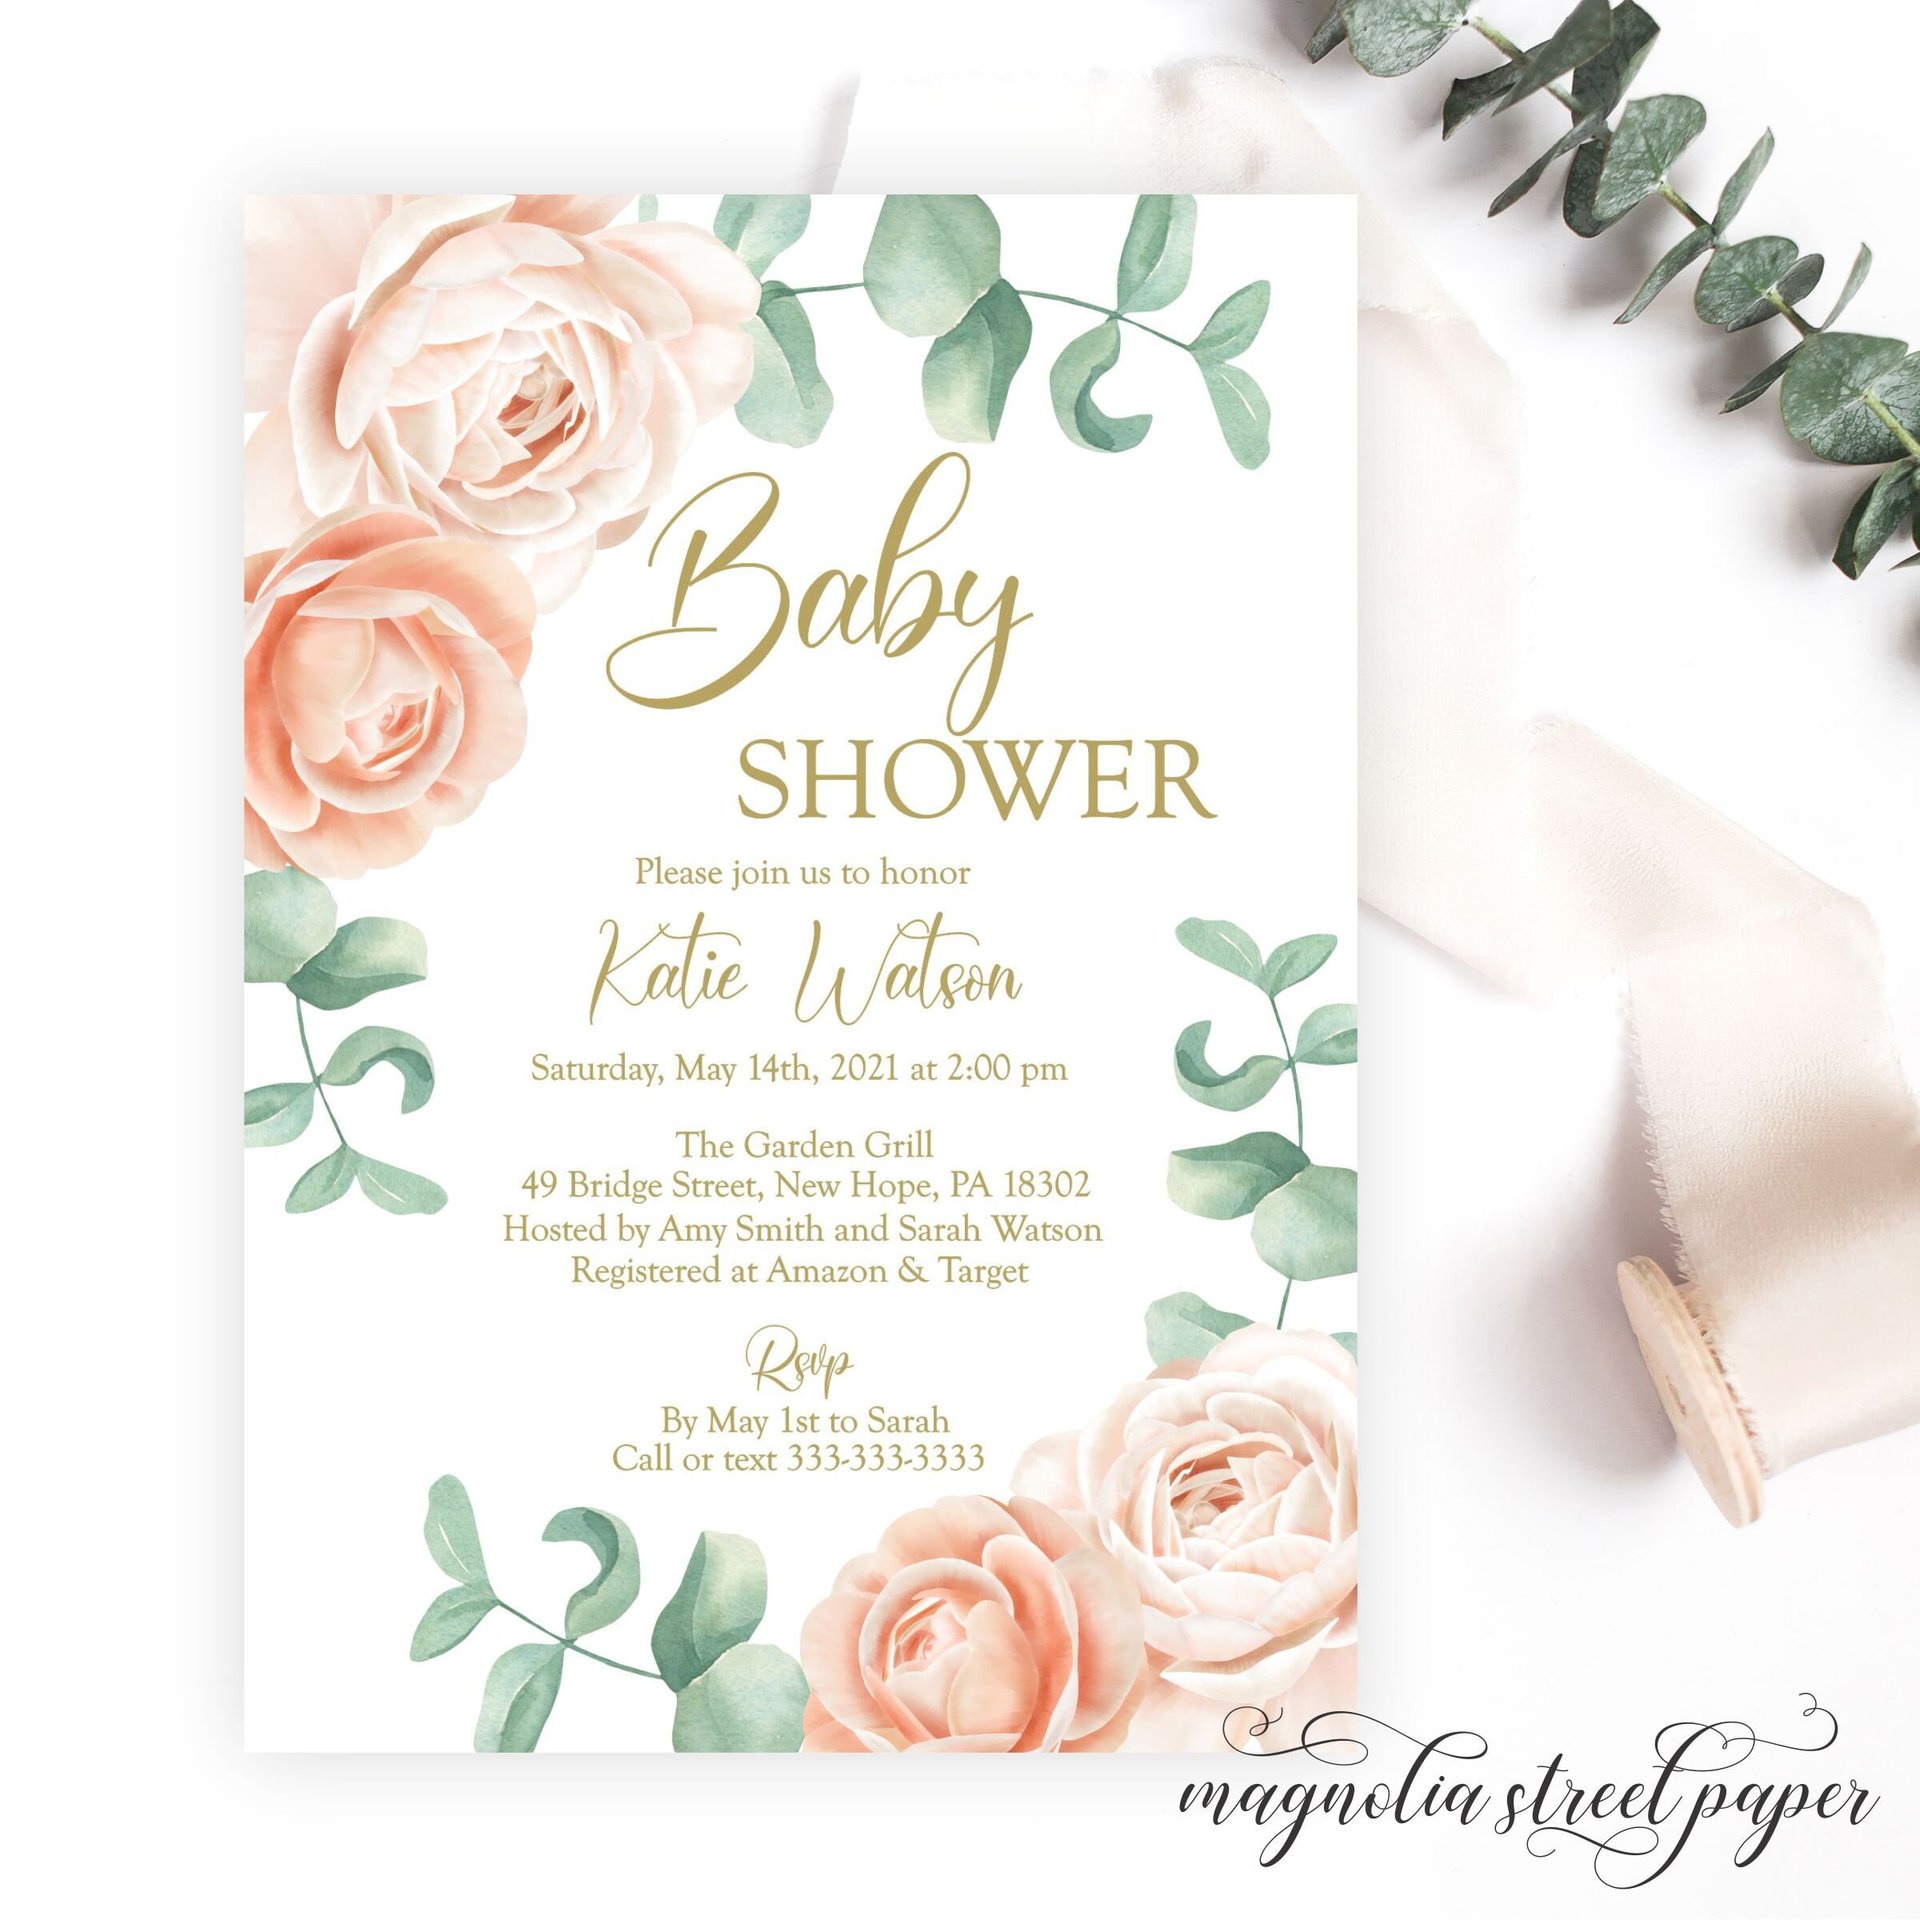 Blush and Beige Floral Baby Shower Invitation, Light Peach and Gold